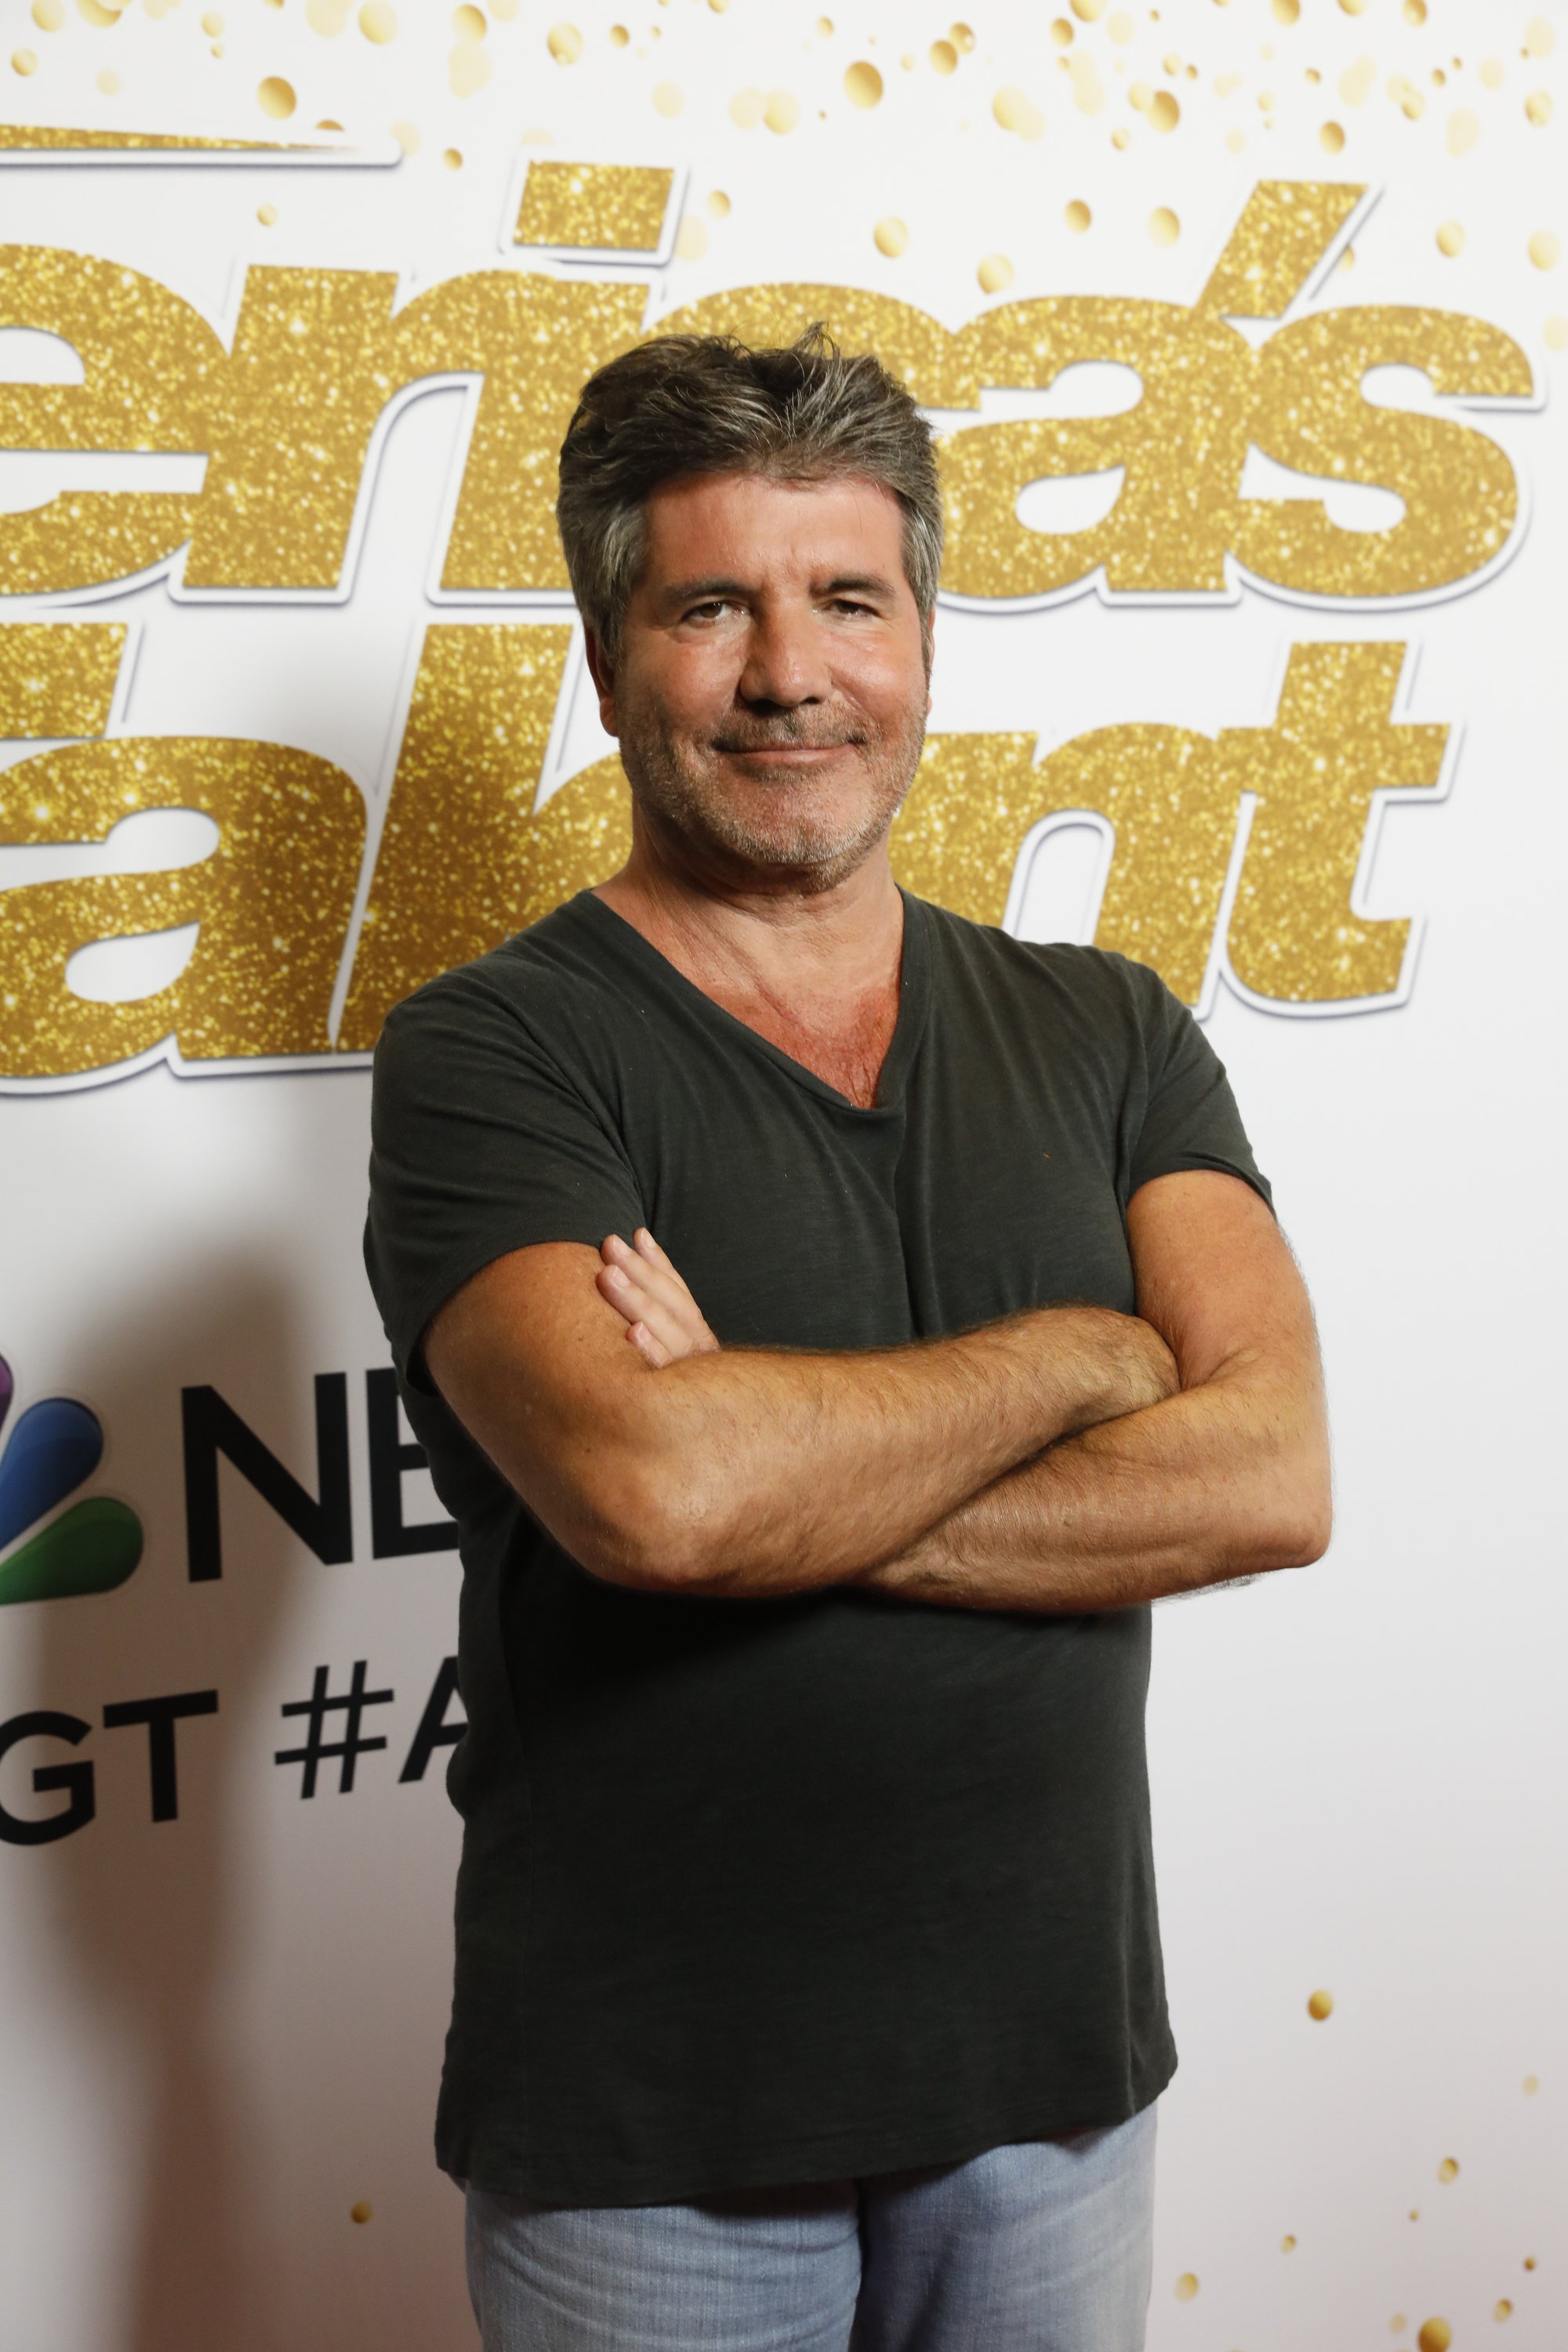 Simon Cowell at the live quarter-finals of the 13th Season of "America's Got Talent" in 2018 | Source: Getty Images